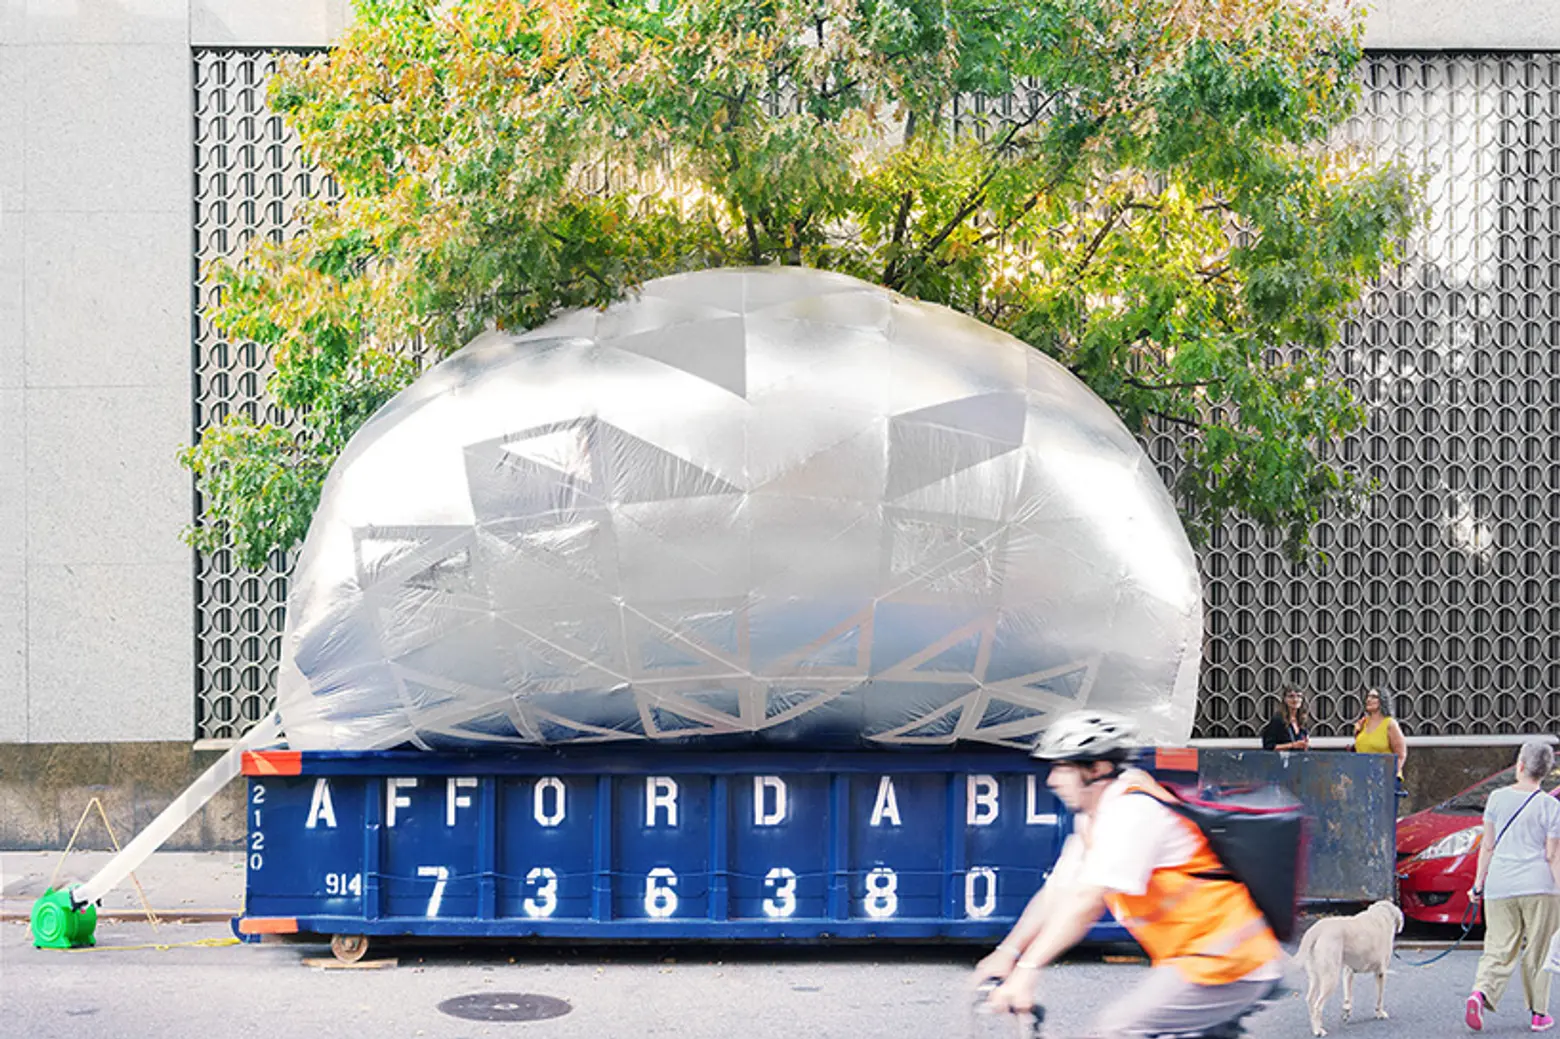 NYC Dumpster Transforms into an Inflatable Urban Education Classroom